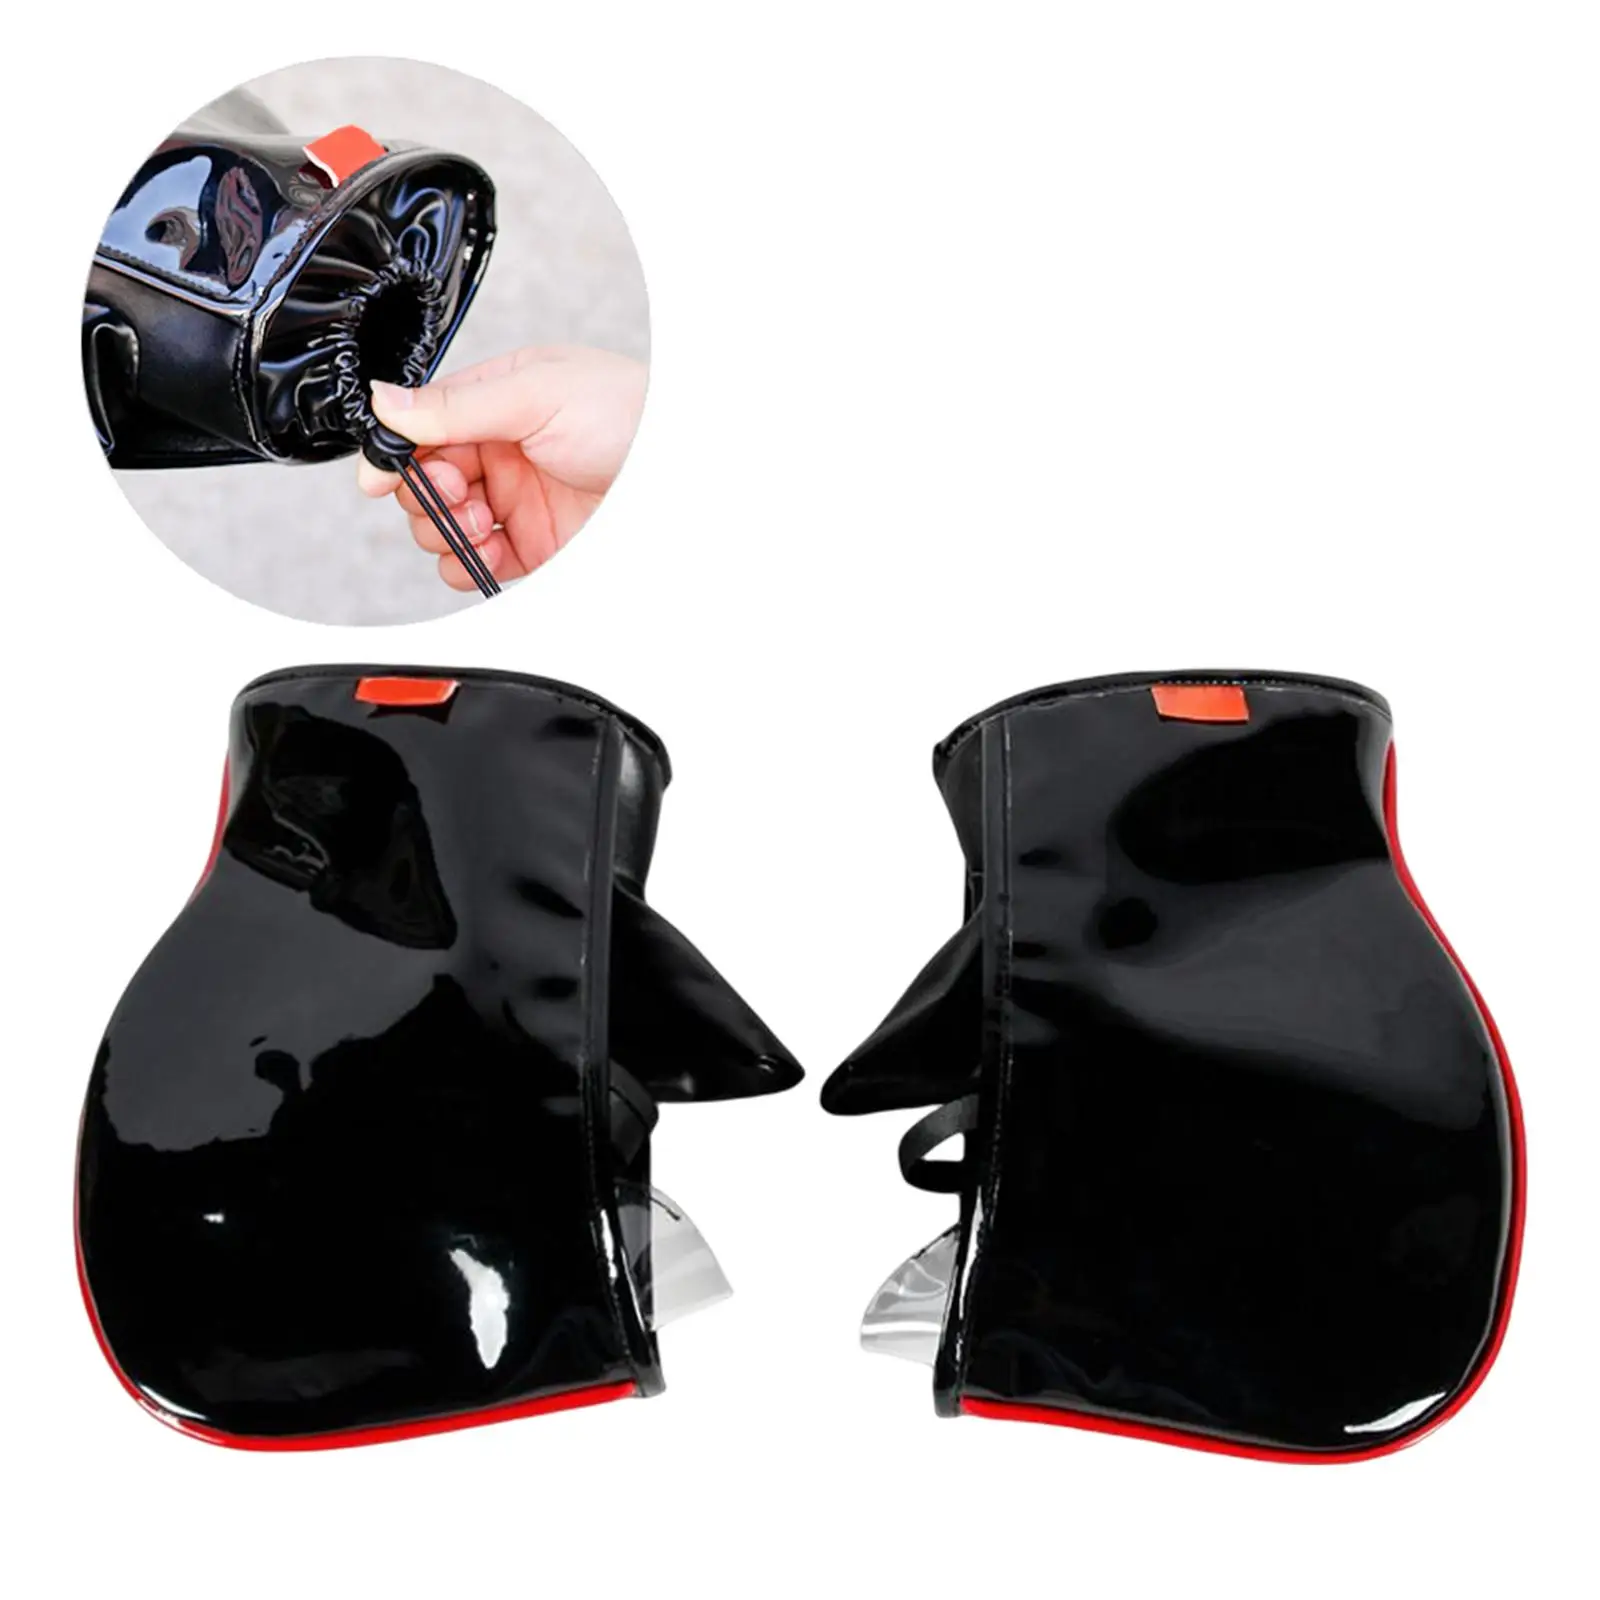 Mirrored PU Leather Motorcycle Handlebar Gloves Mittens for Motorcycle